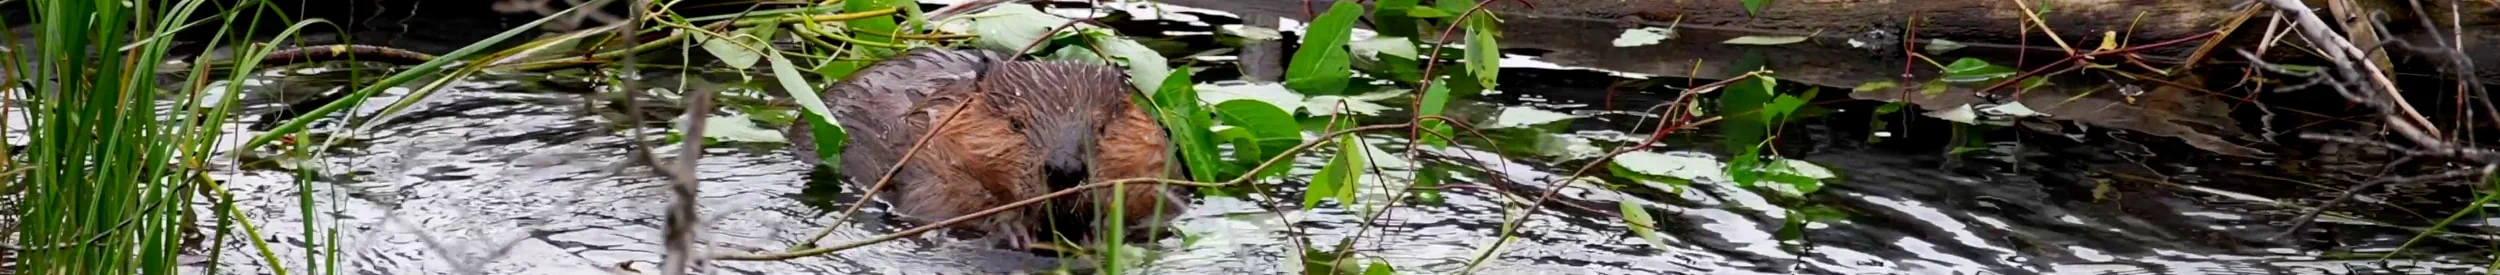 A beaver sits in water, surrounded by brush and weeds